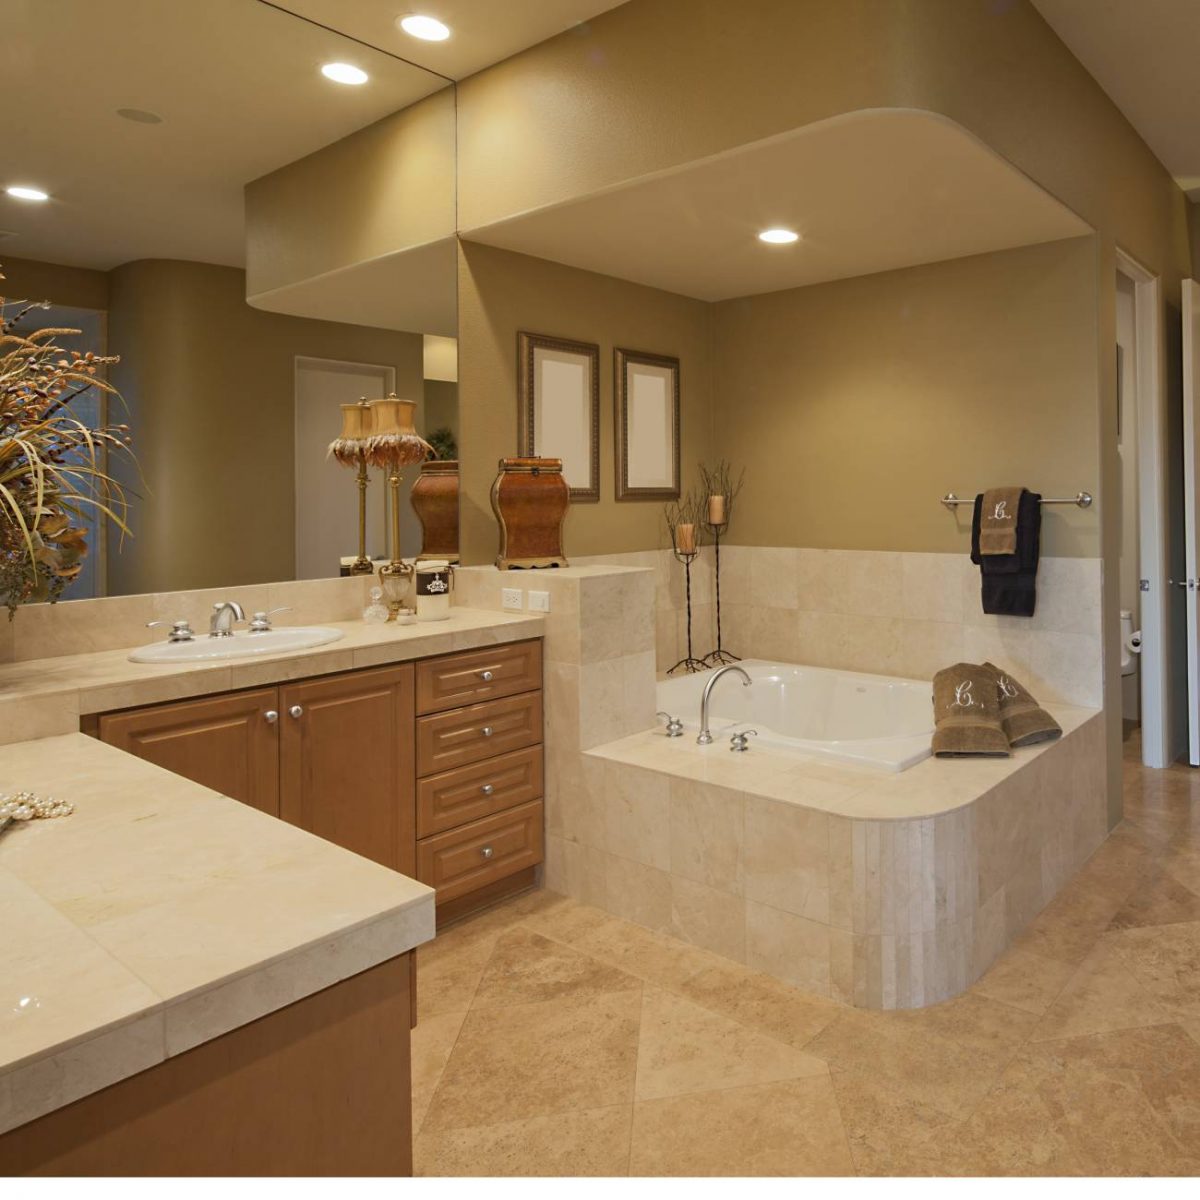 Modern tan bathroom with wrap around sink and jacuzzi